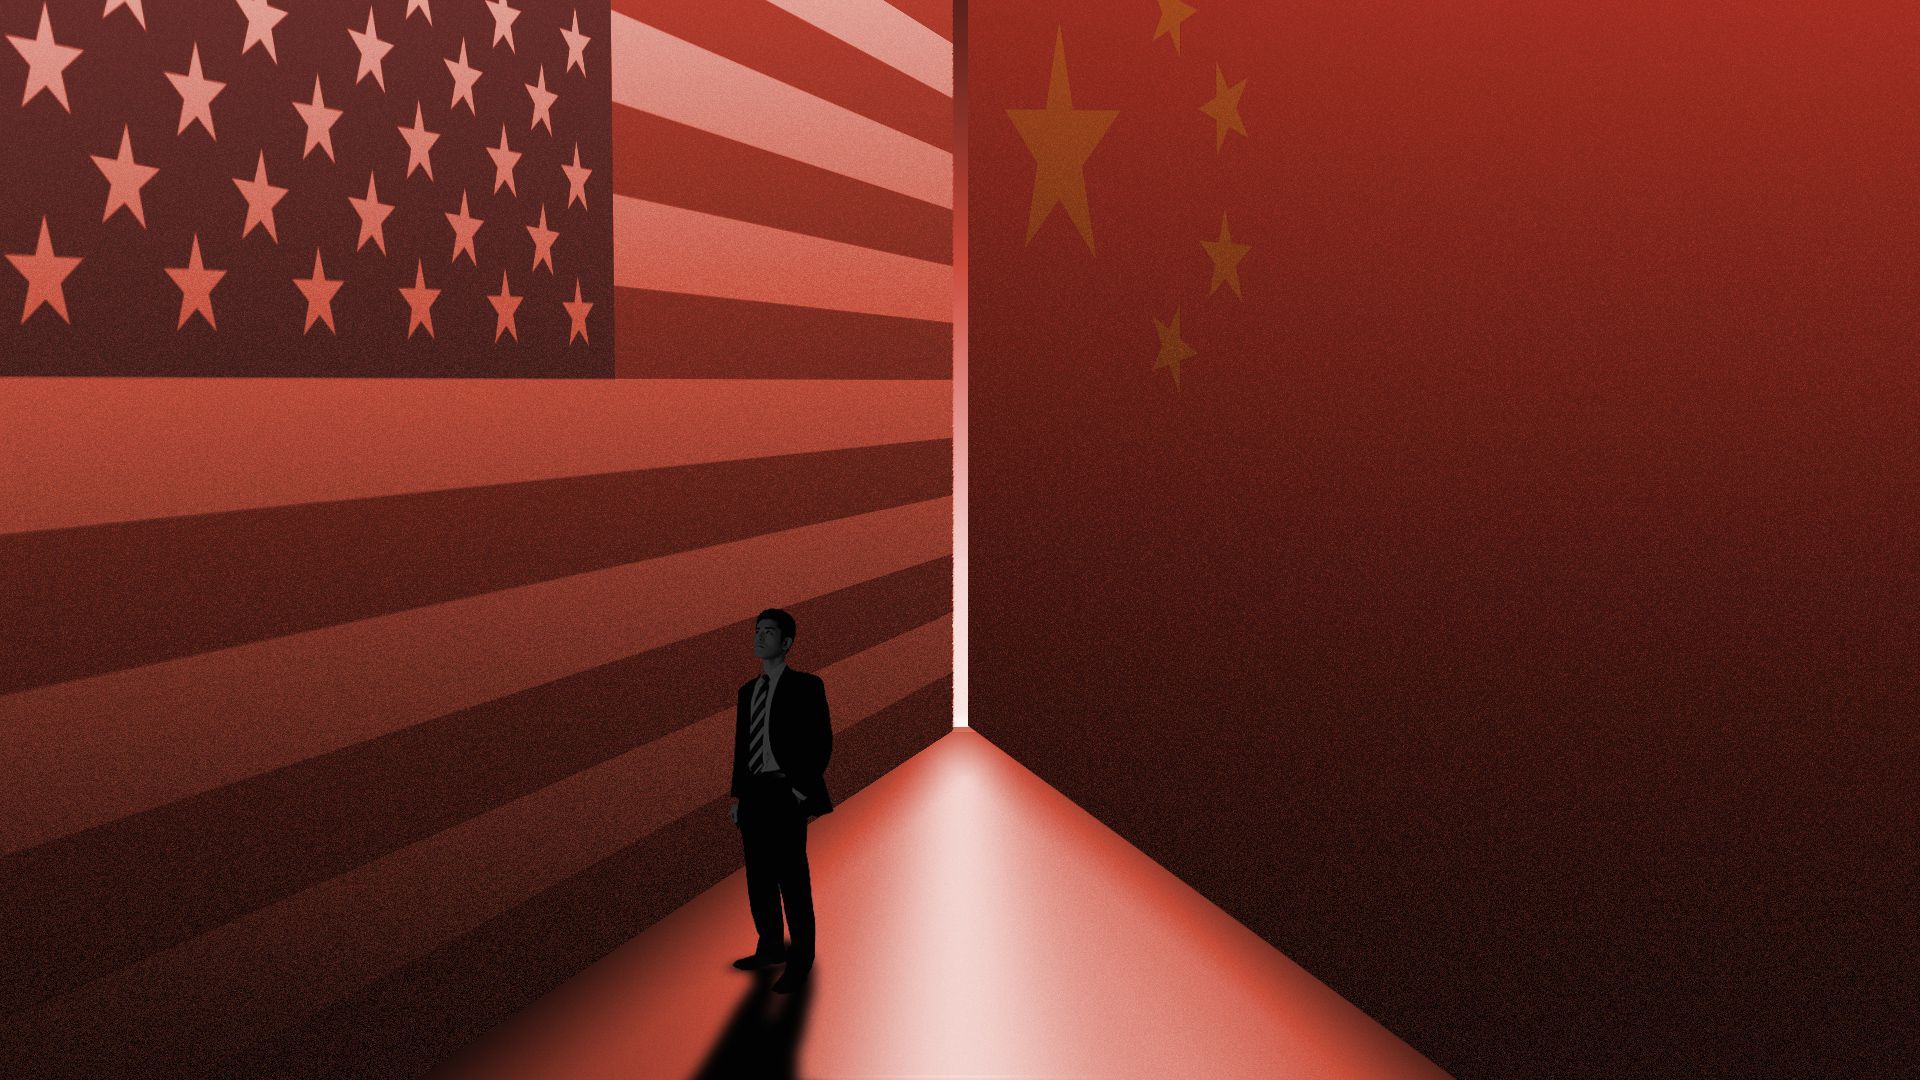 Illustration of a person standing between a US and Chinese flag. 